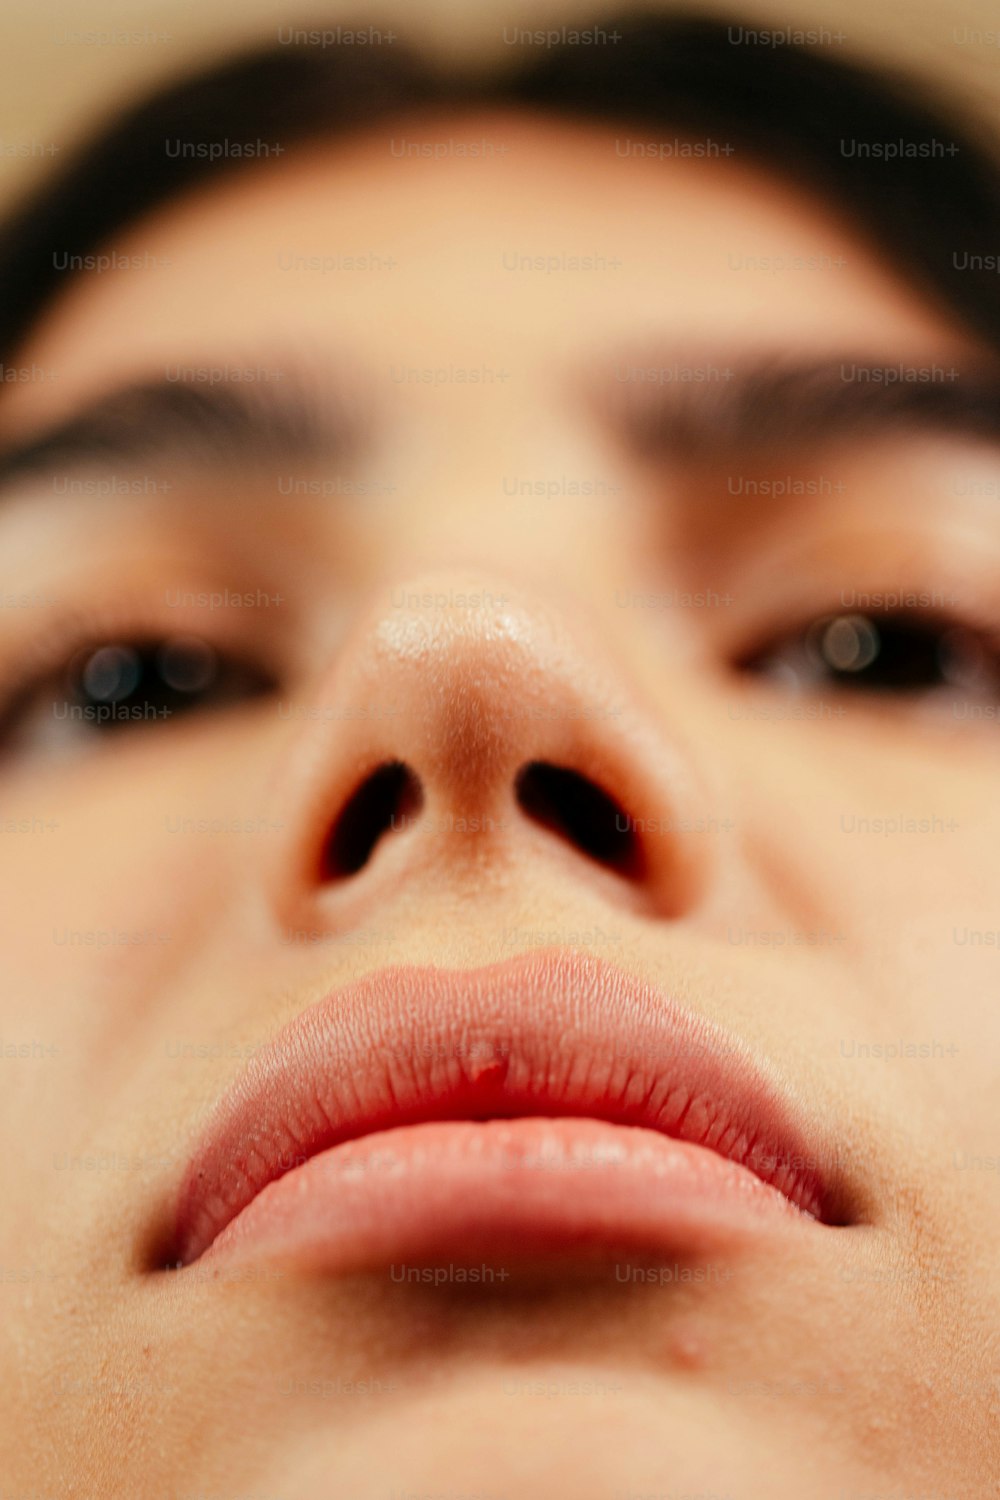 a close up of a person's nose and nose